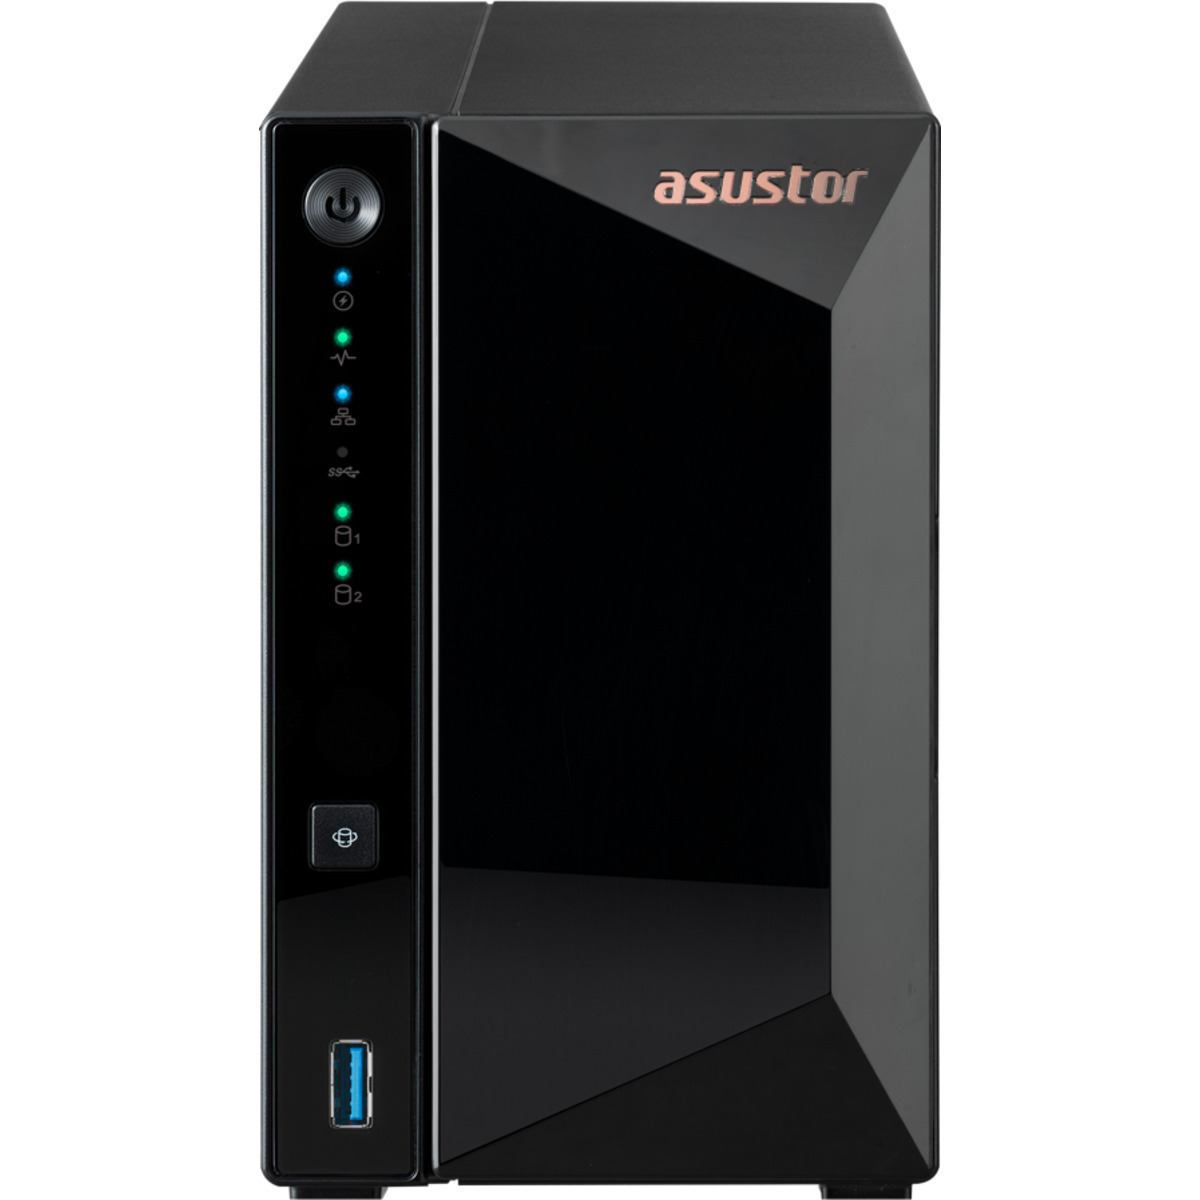 ASUSTOR DRIVESTOR 2 Pro Gen2 AS3302T v2 48tb 2-Bay Desktop Personal / Basic Home / Small Office NAS - Network Attached Storage Device 2x24tb Seagate IronWolf Pro ST24000NT002 3.5 7200rpm SATA 6Gb/s HDD NAS Class Drives Installed - Burn-In Tested - ON SALE DRIVESTOR 2 Pro Gen2 AS3302T v2